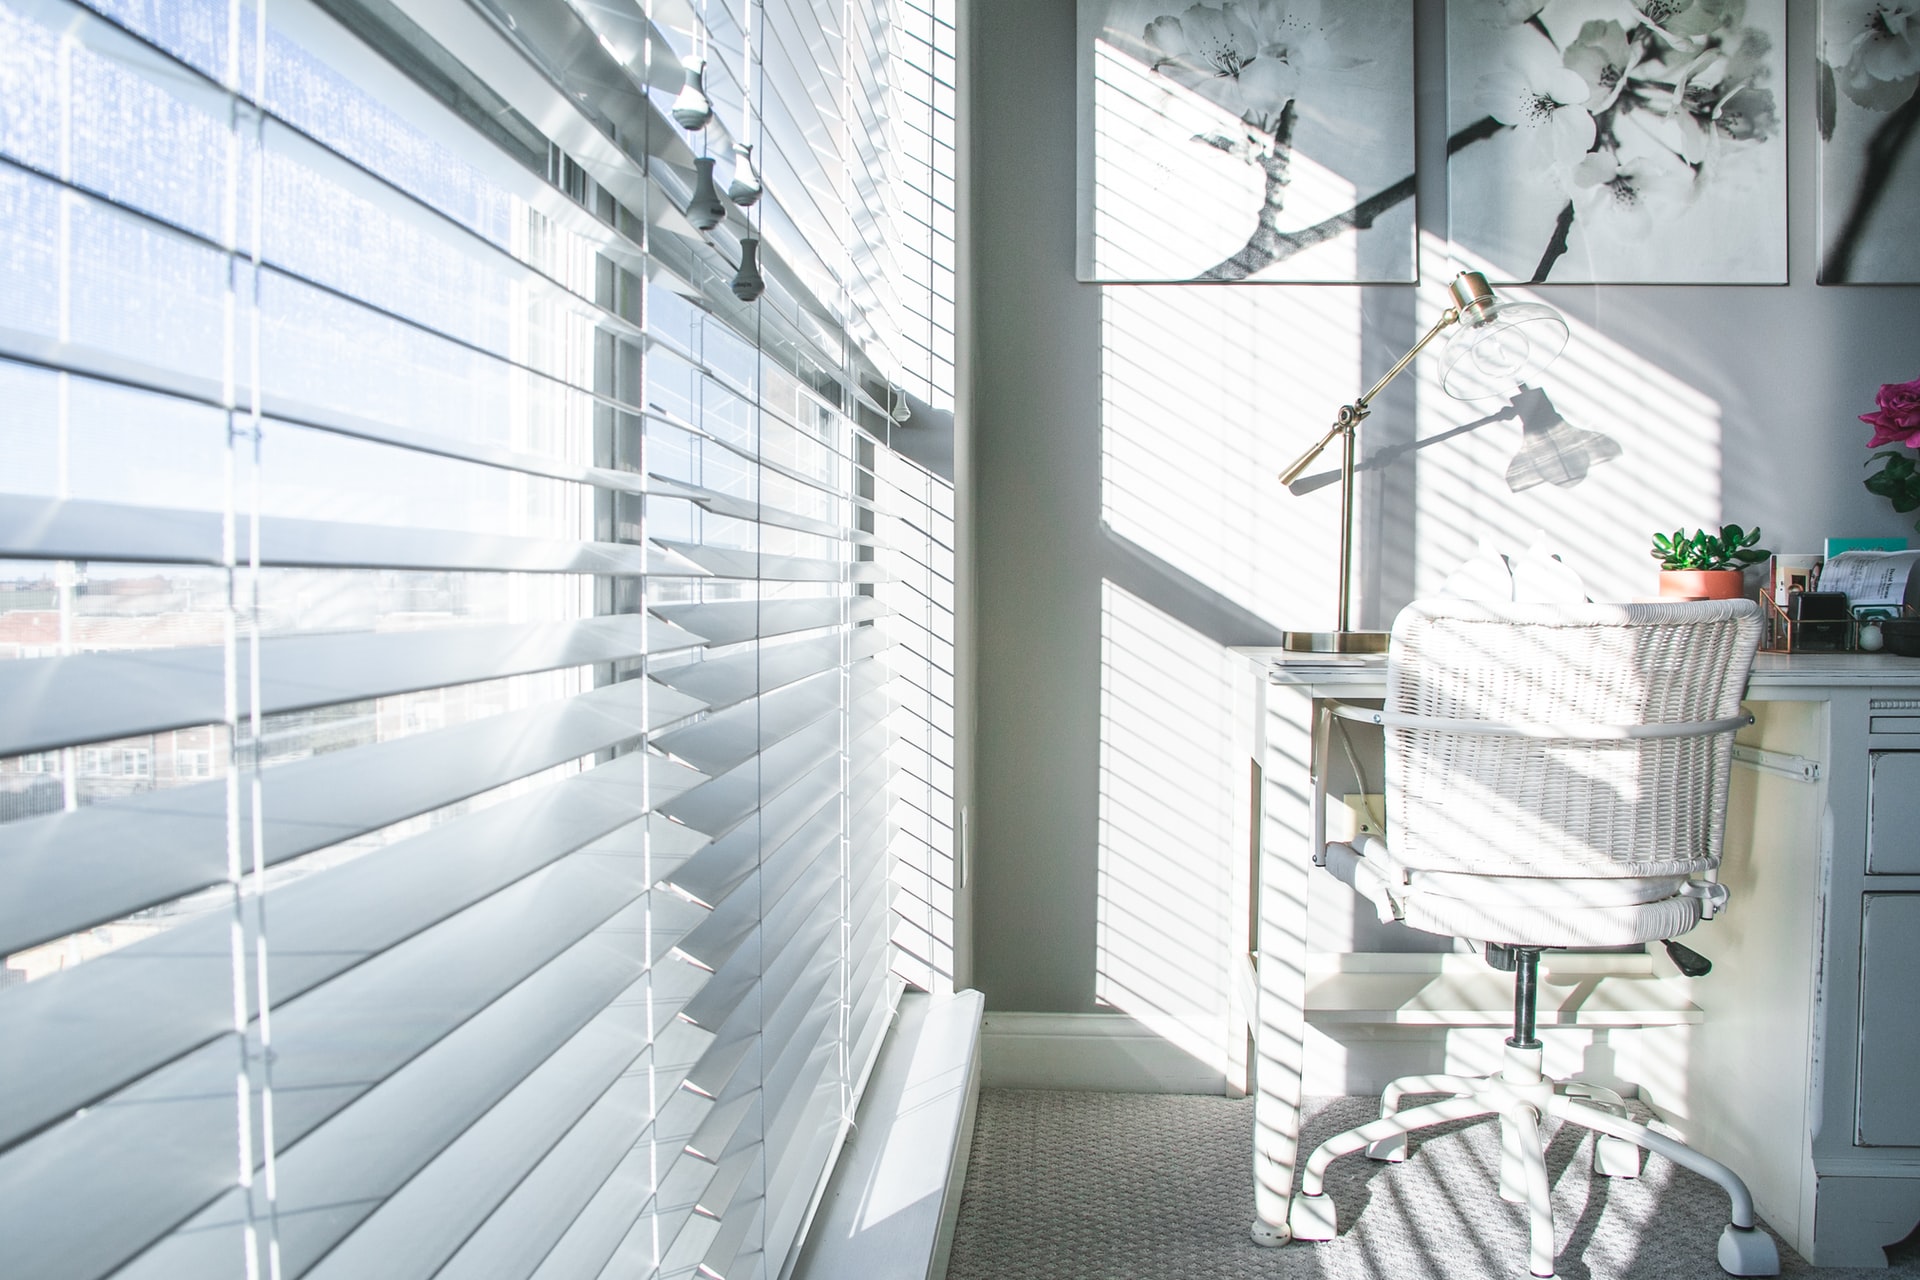 Do roller blinds work well in the office?